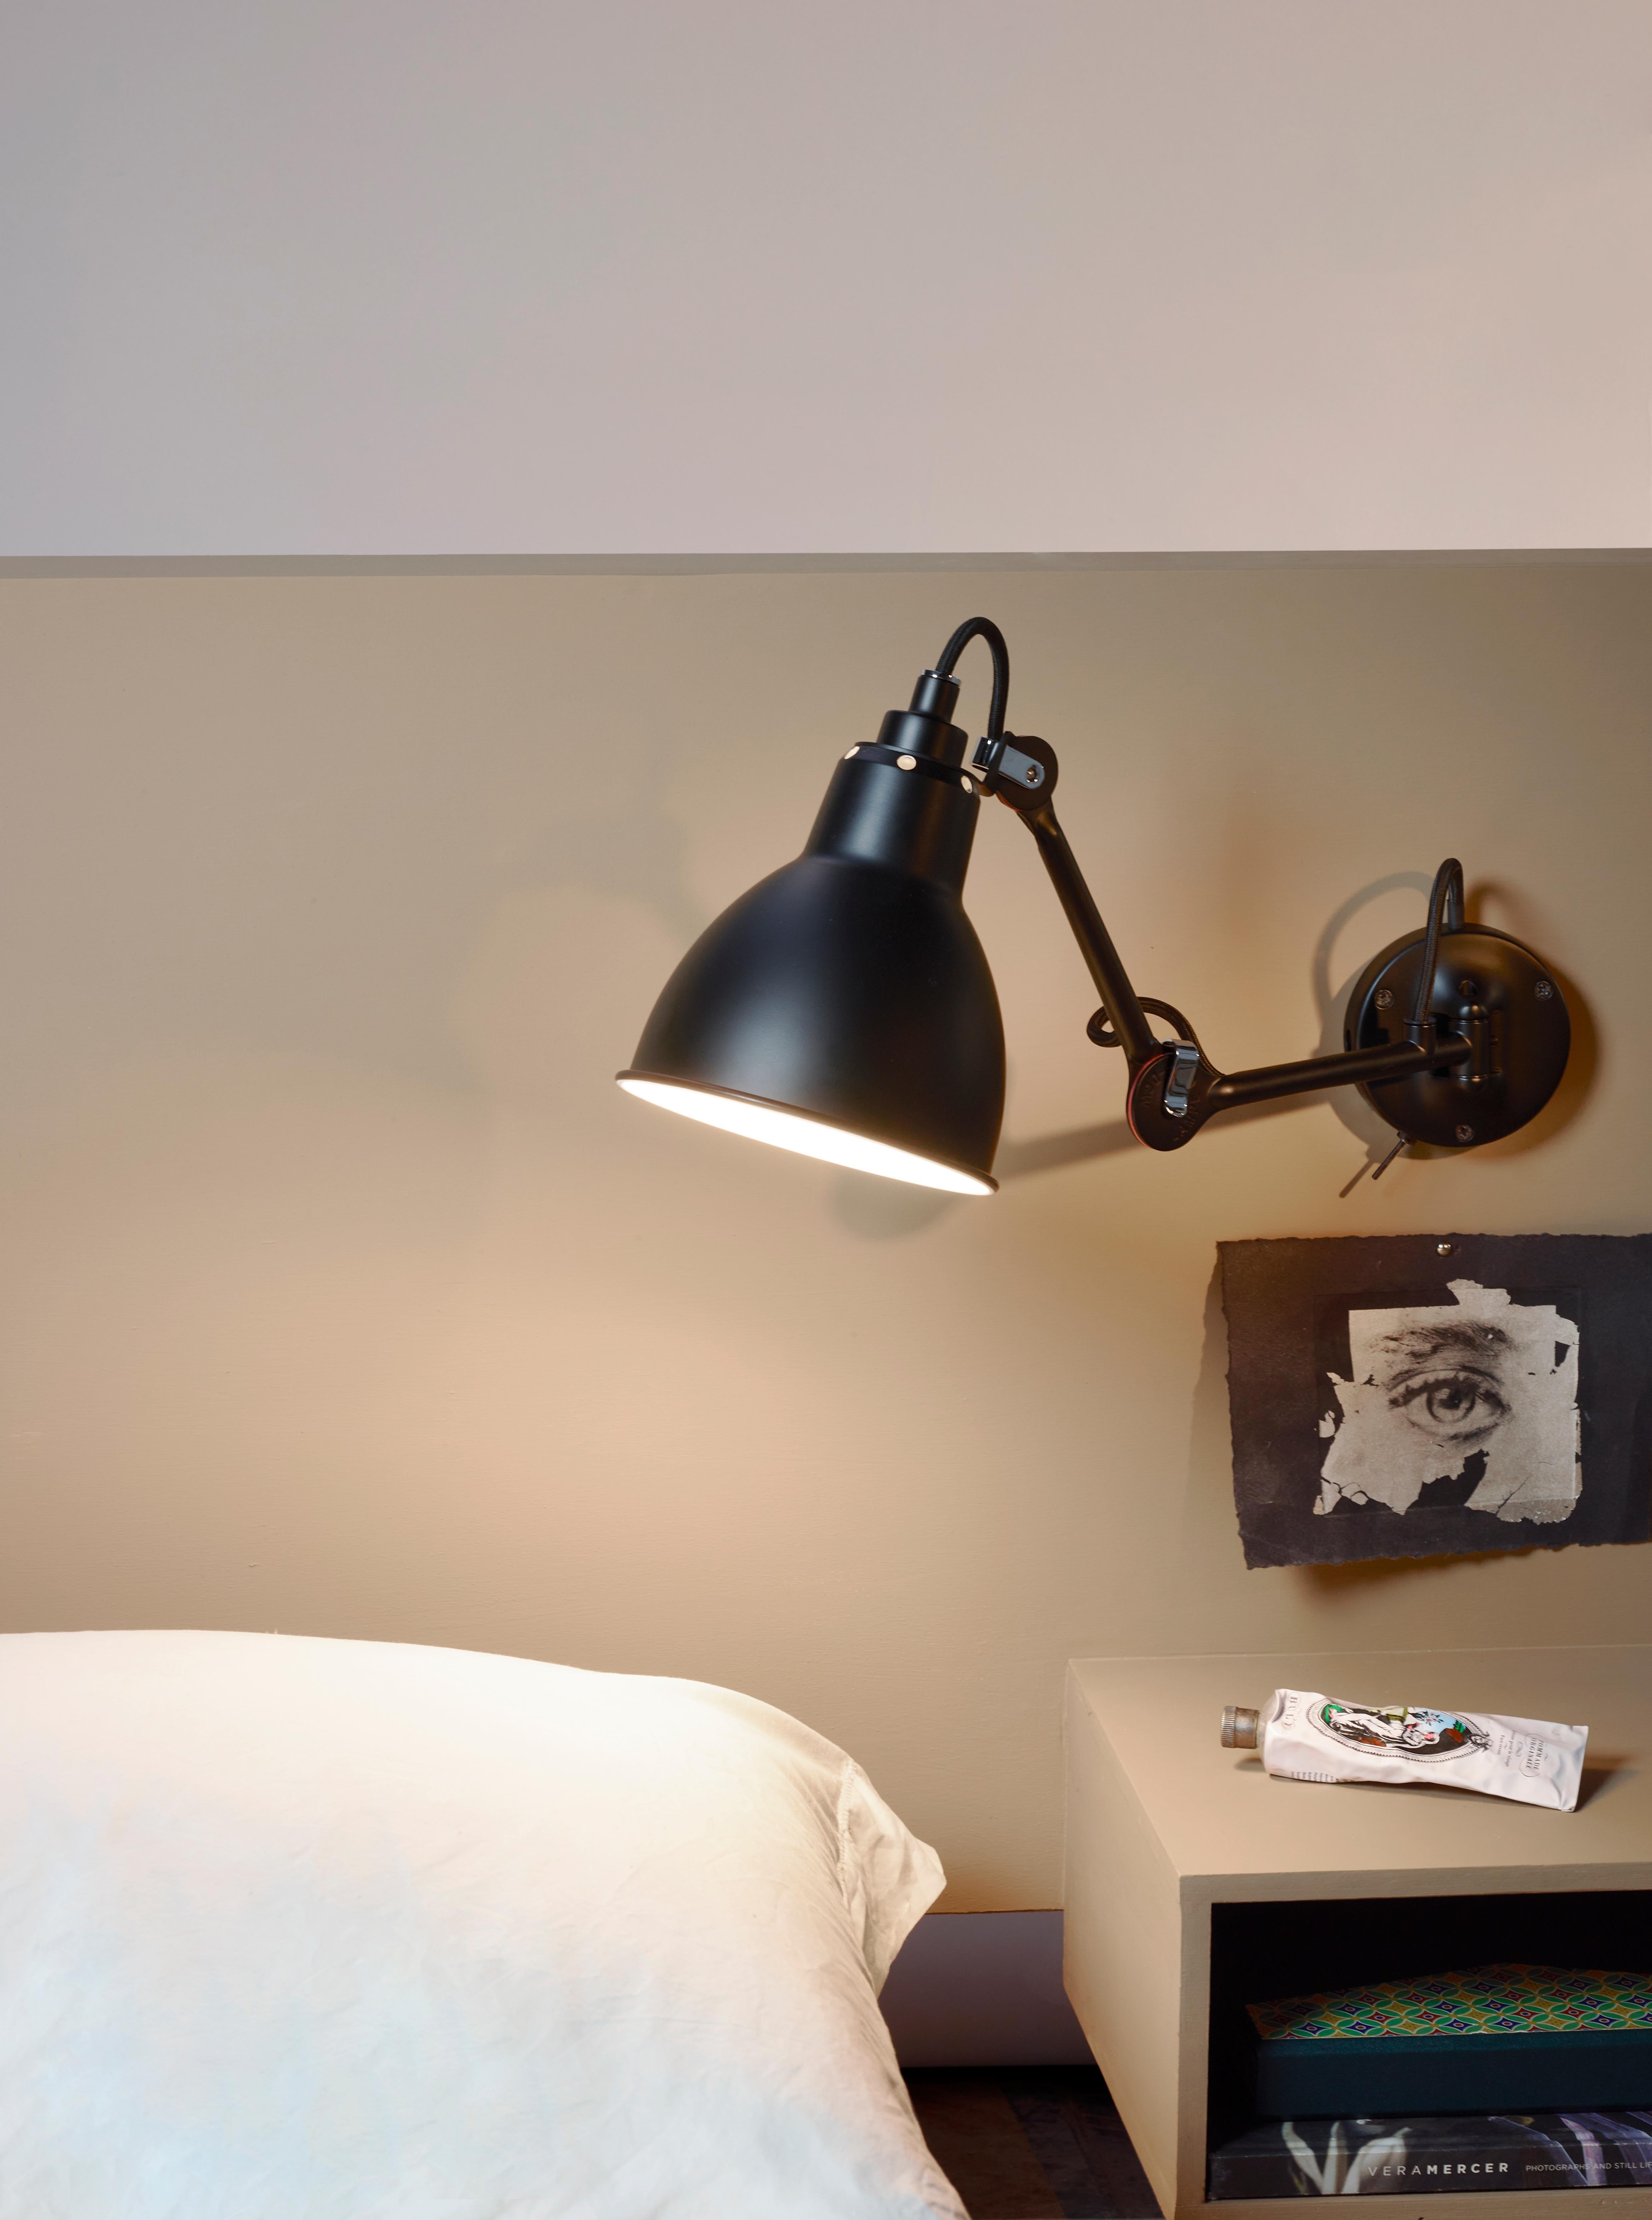 DCW Editions La Lampe Gras N°204 SW Wall Lamp in Black Steel Arm & Copper Shade In New Condition For Sale In Brooklyn, NY